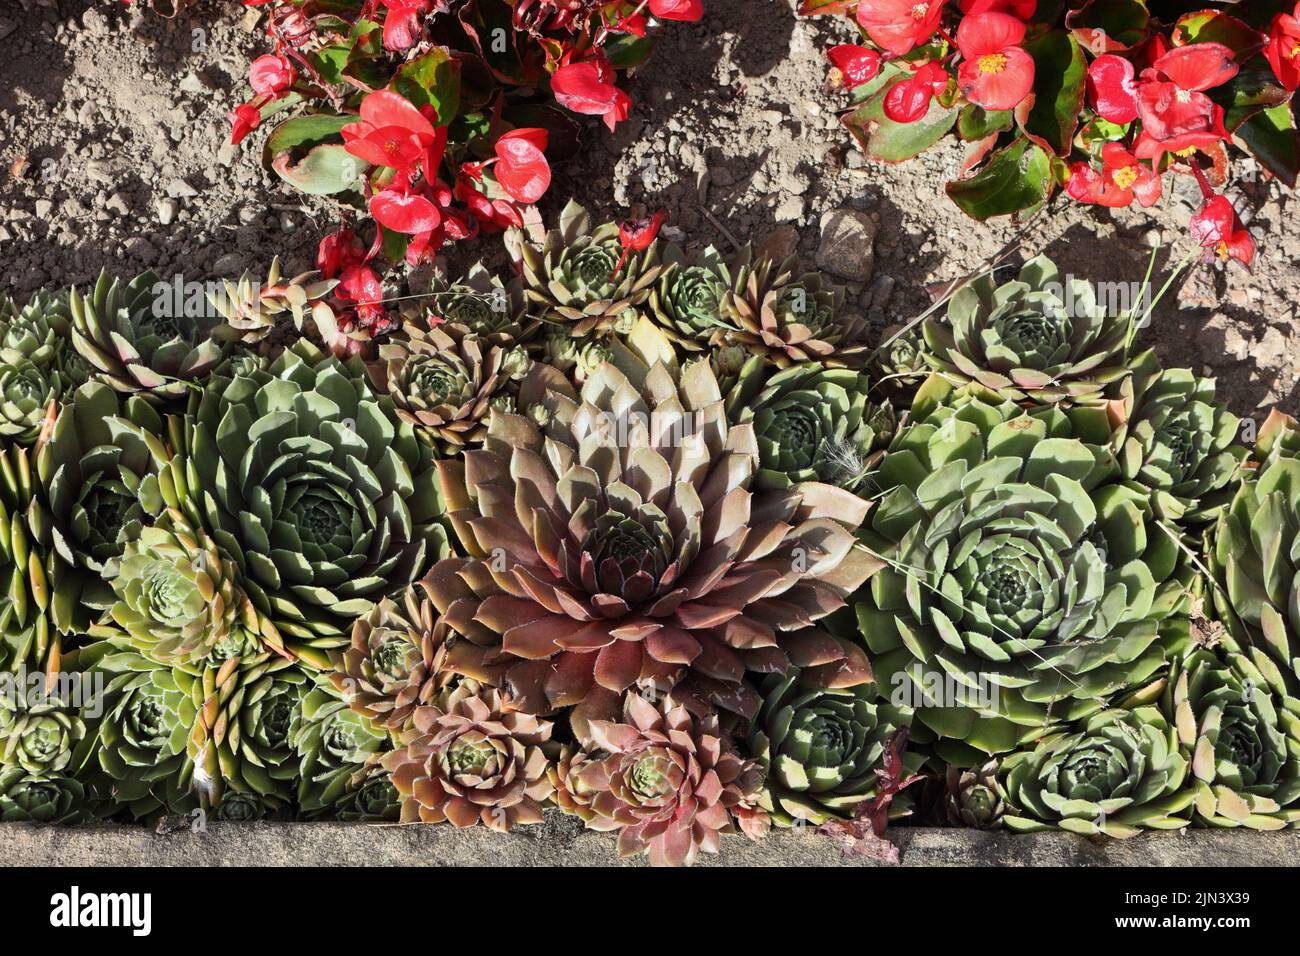 Sempervivum plants used as bedding plants in a parkland flower display Stock Photo